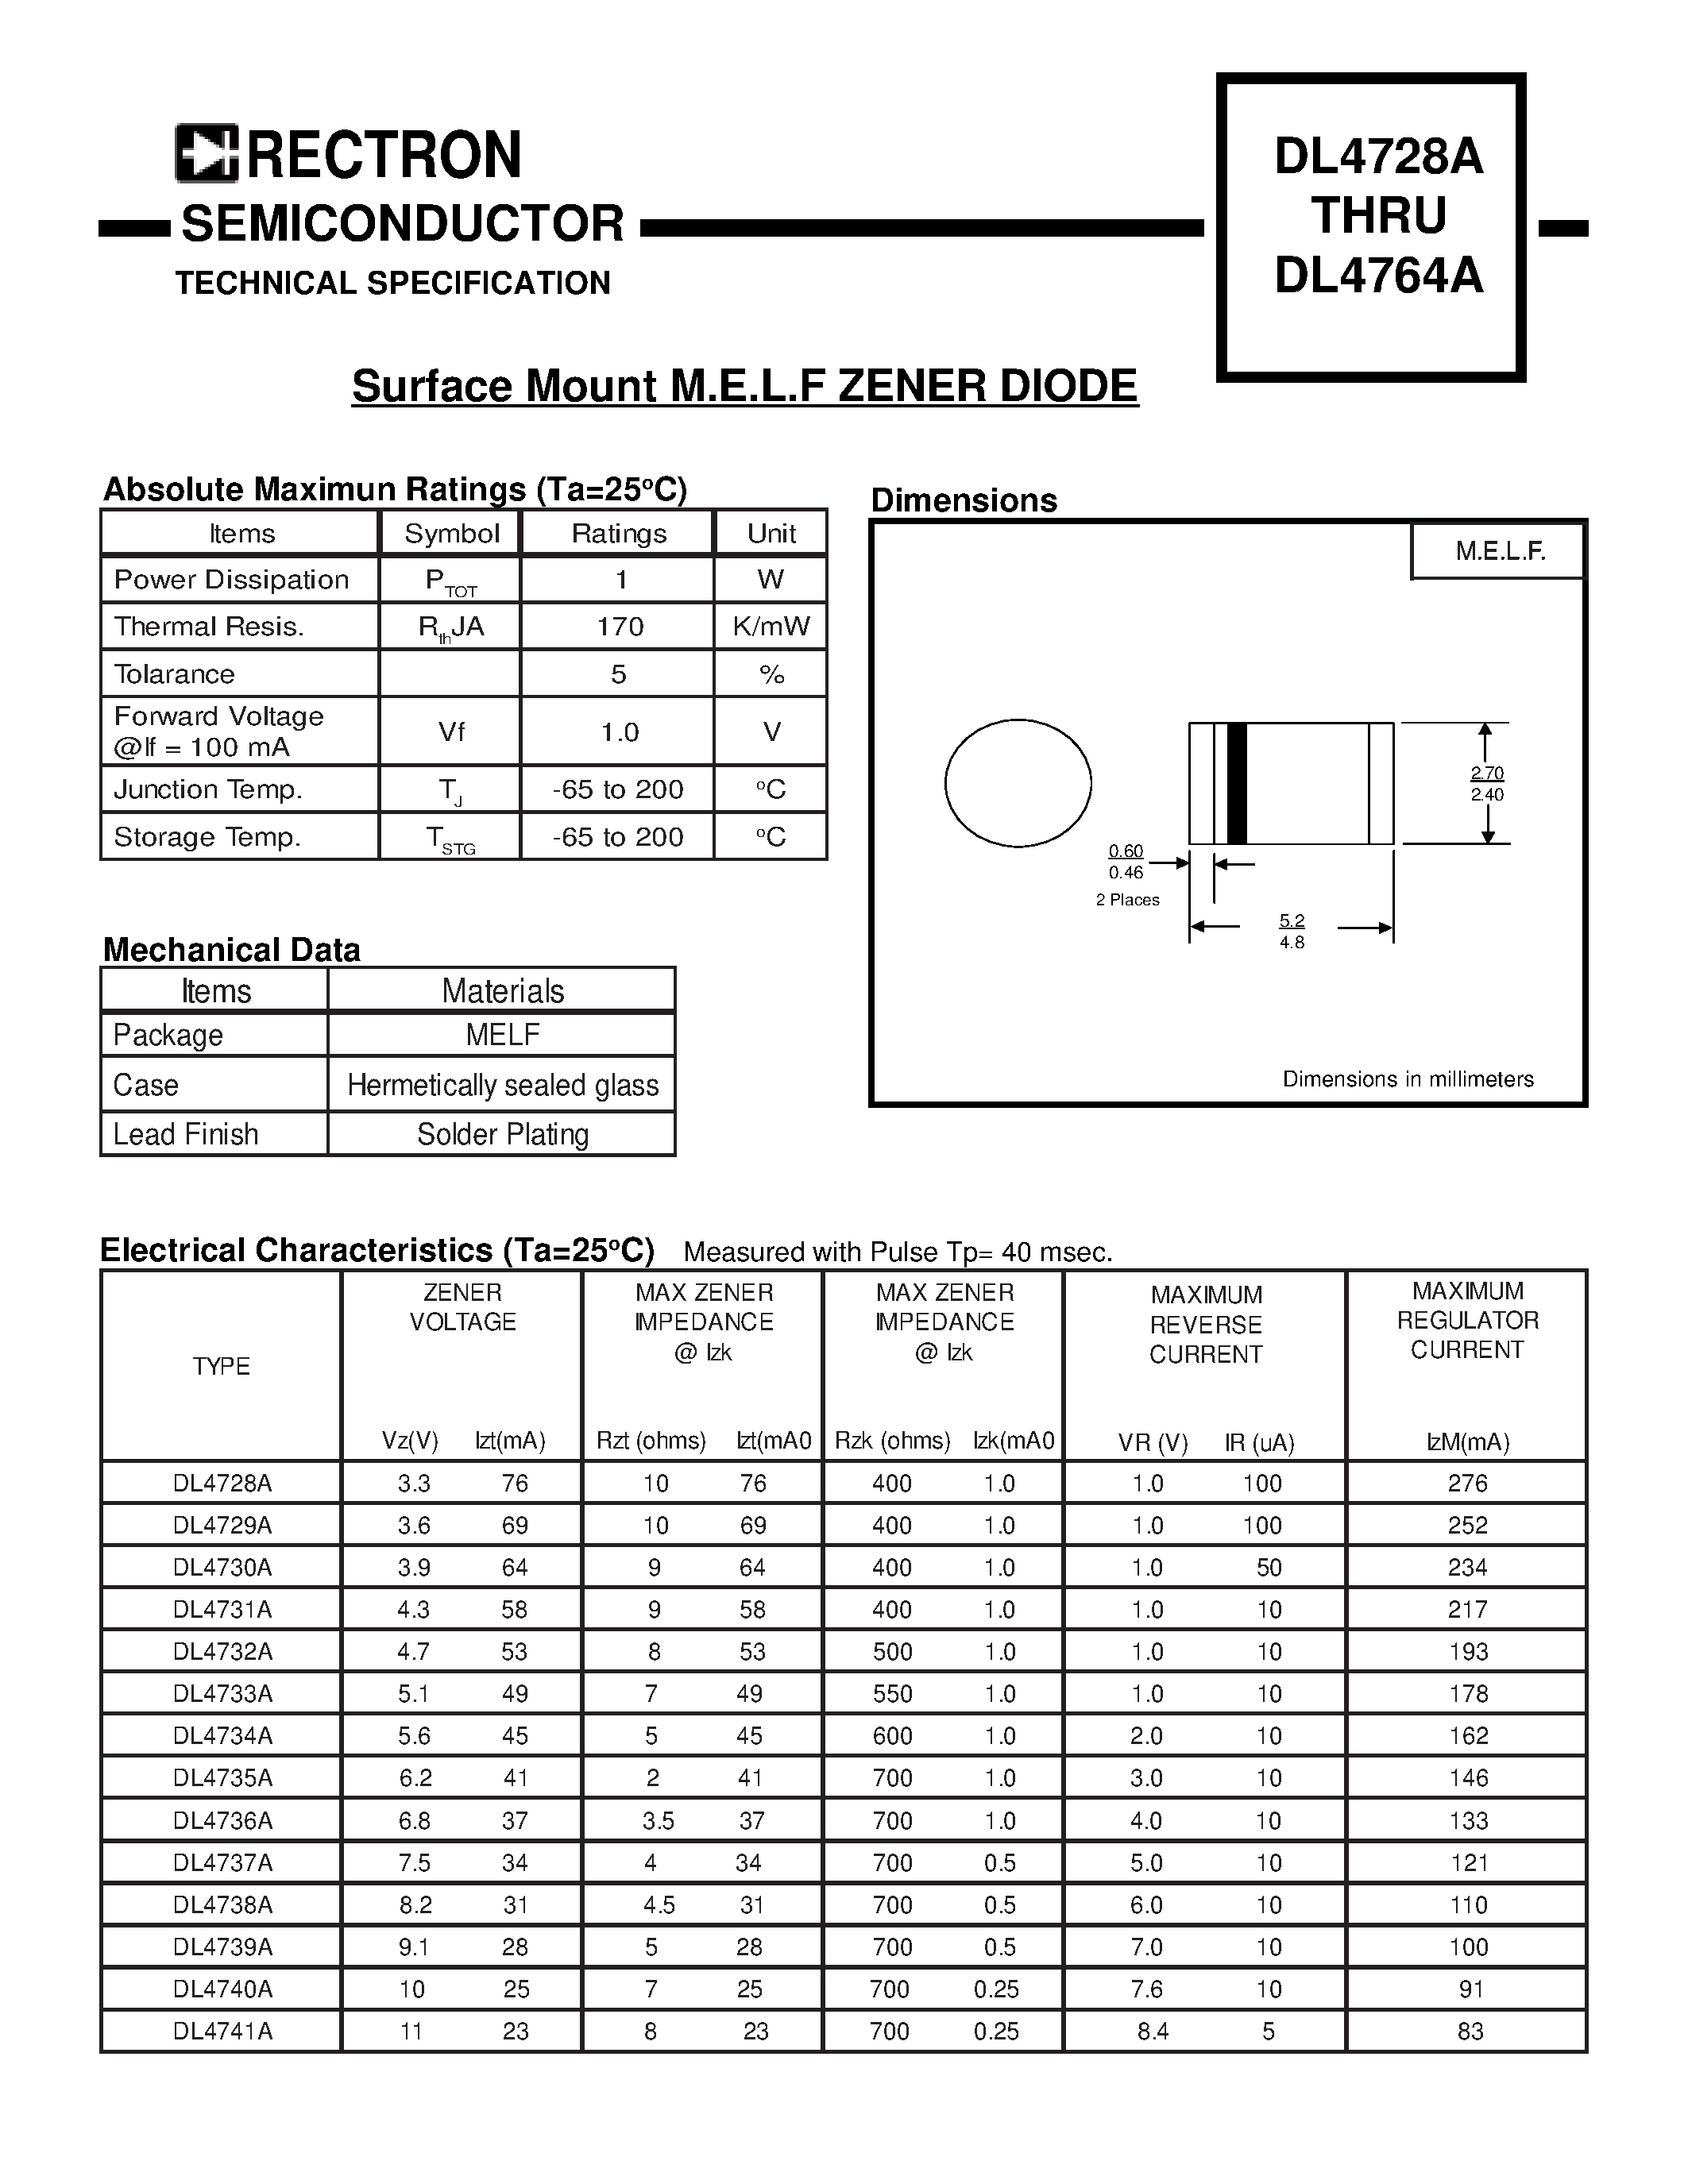 Datasheet DL4753A - Surface Mount M.E.L.F ZENER DIODE page 1